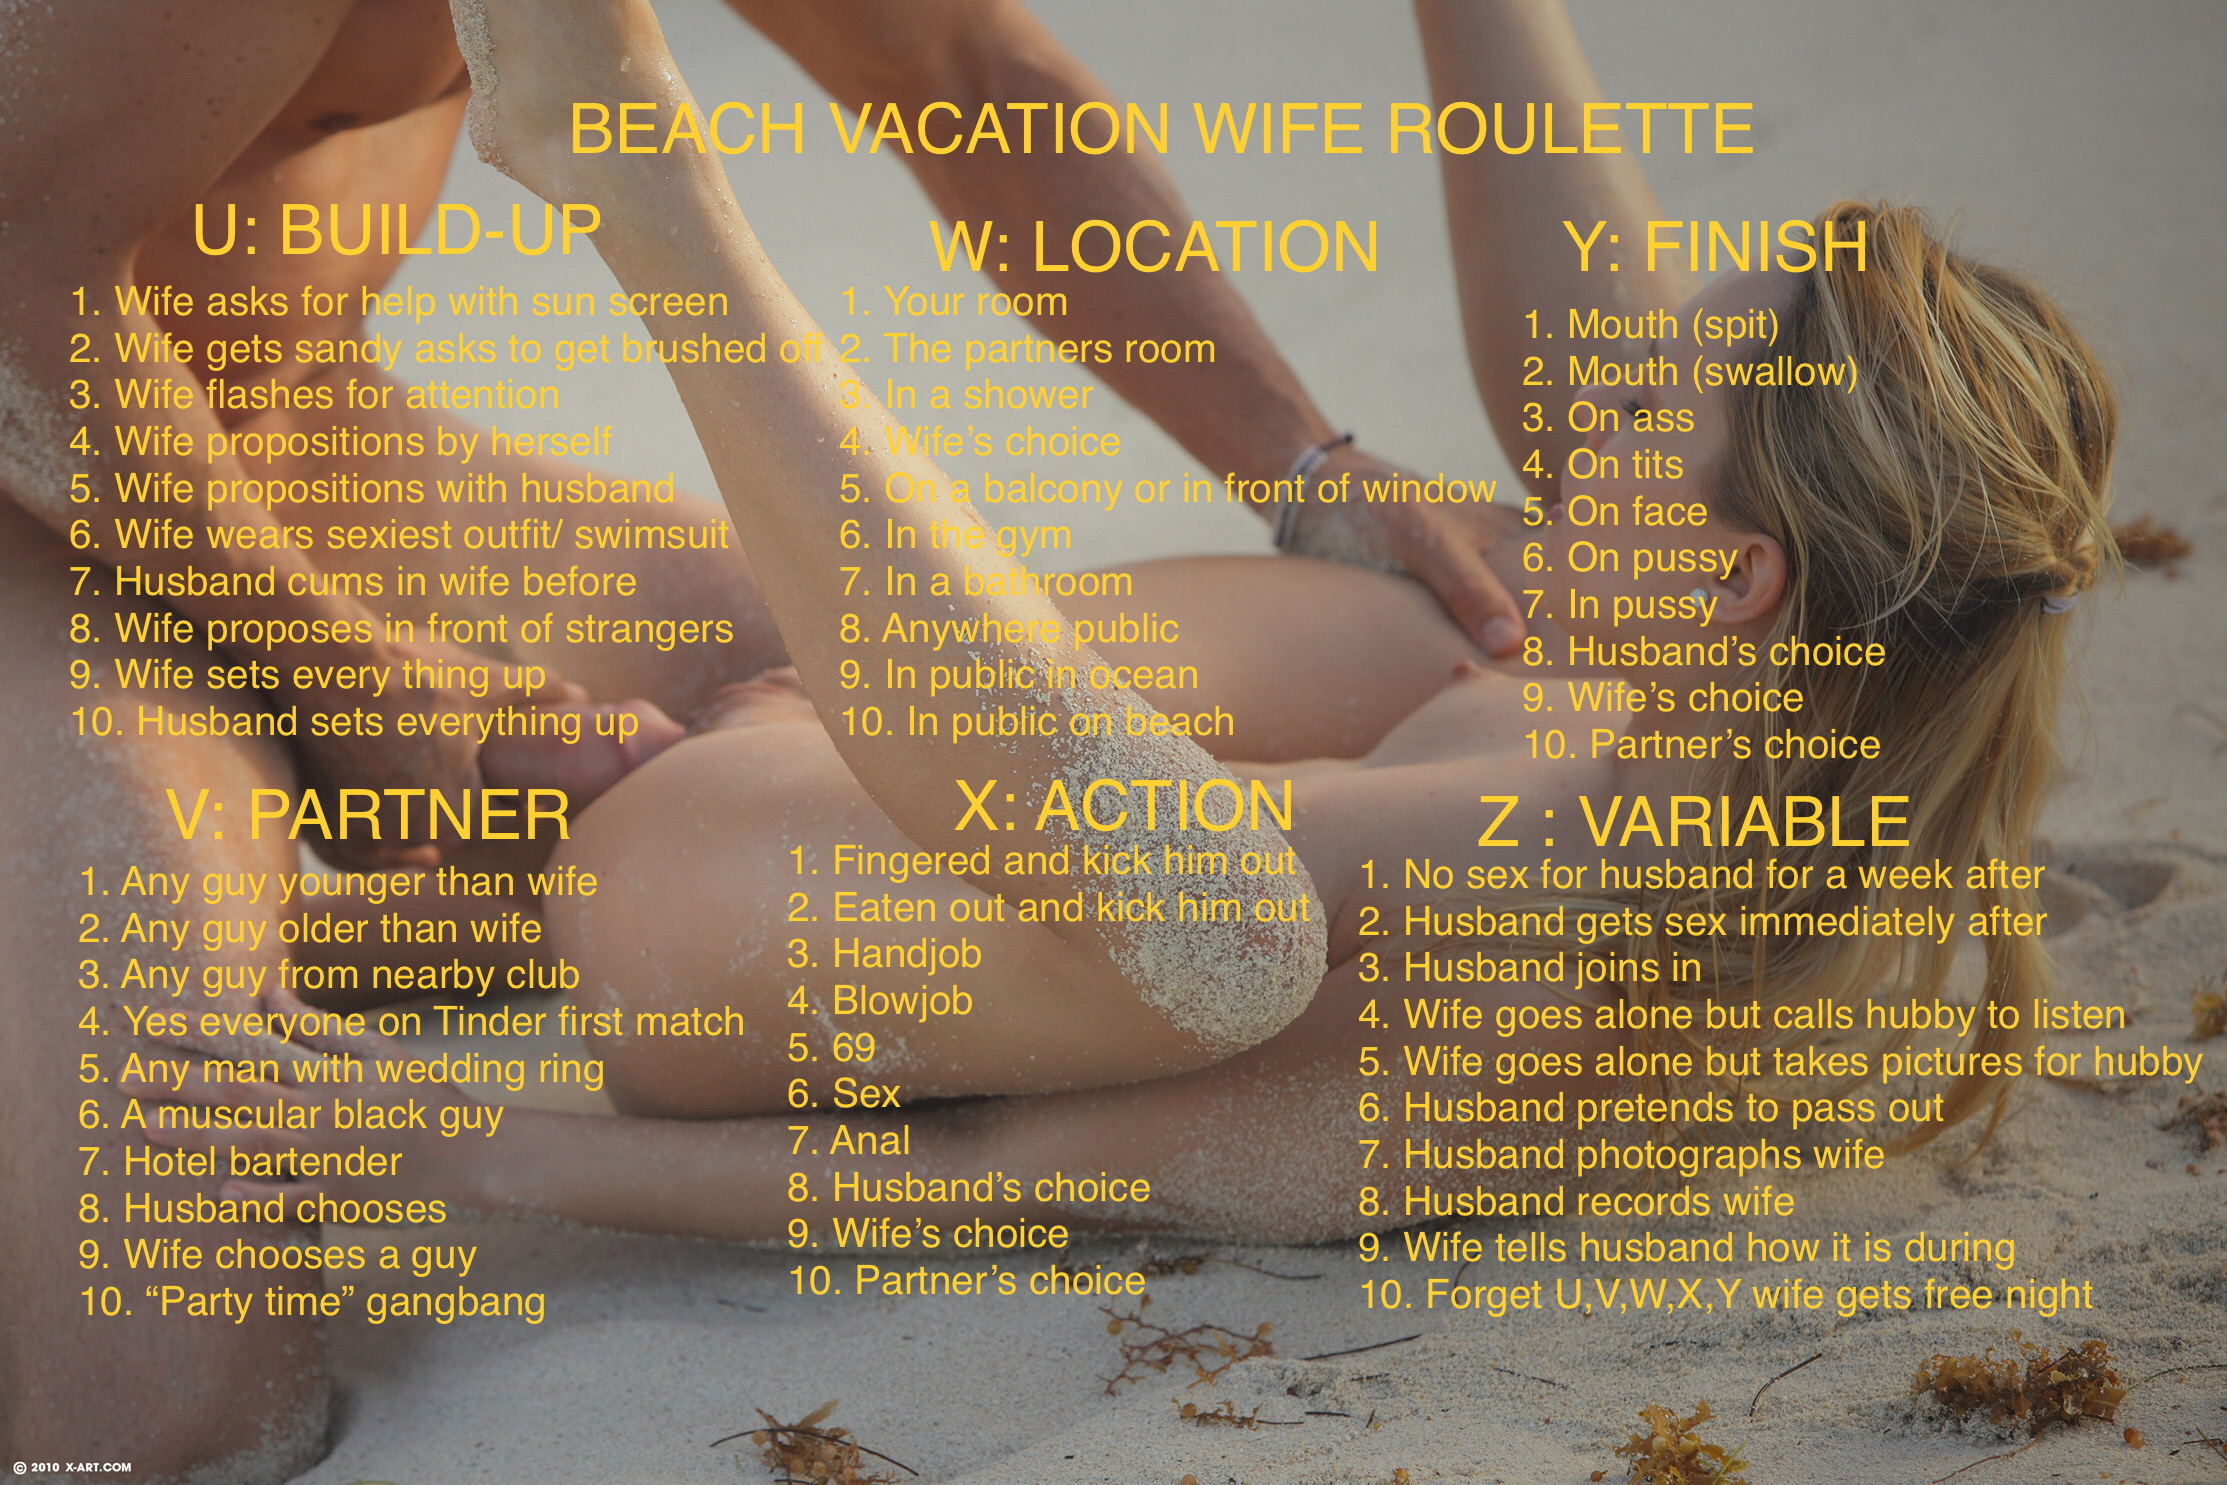 Beach vacation wife roulette photo image